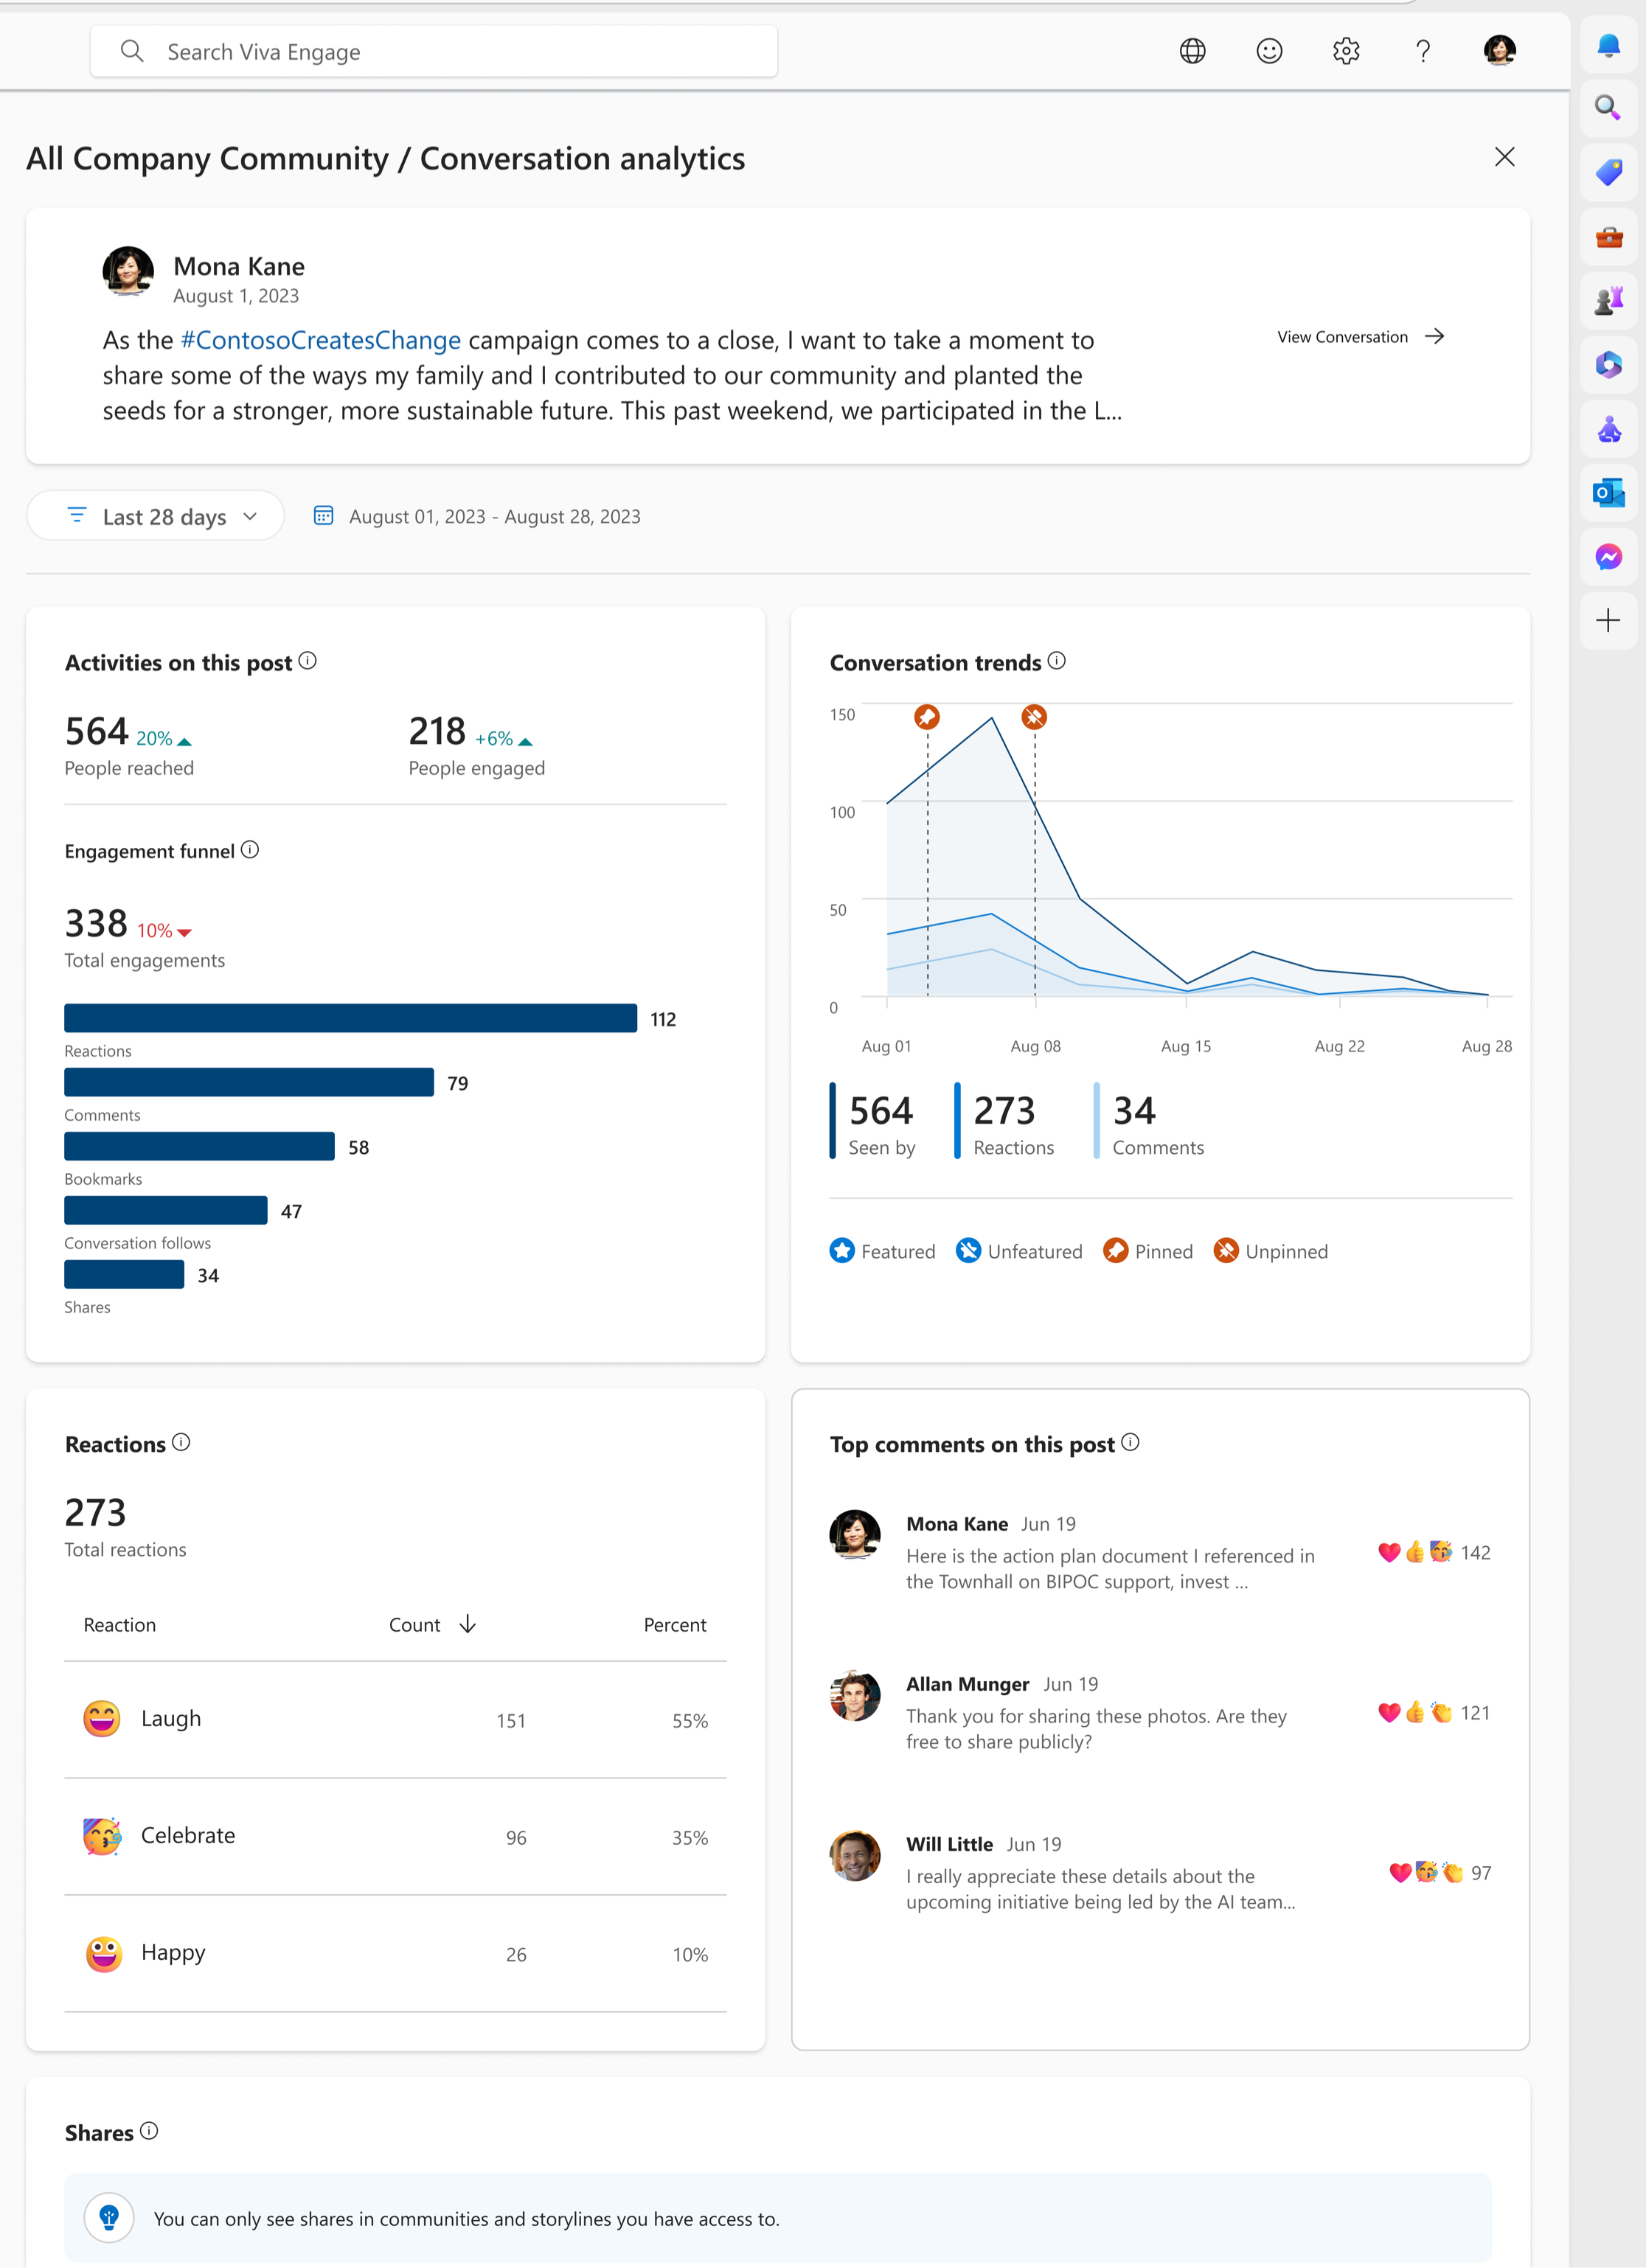 Screenshot shows conversation trends, post activities, and other metrics in the dashboard for conversation analytics.